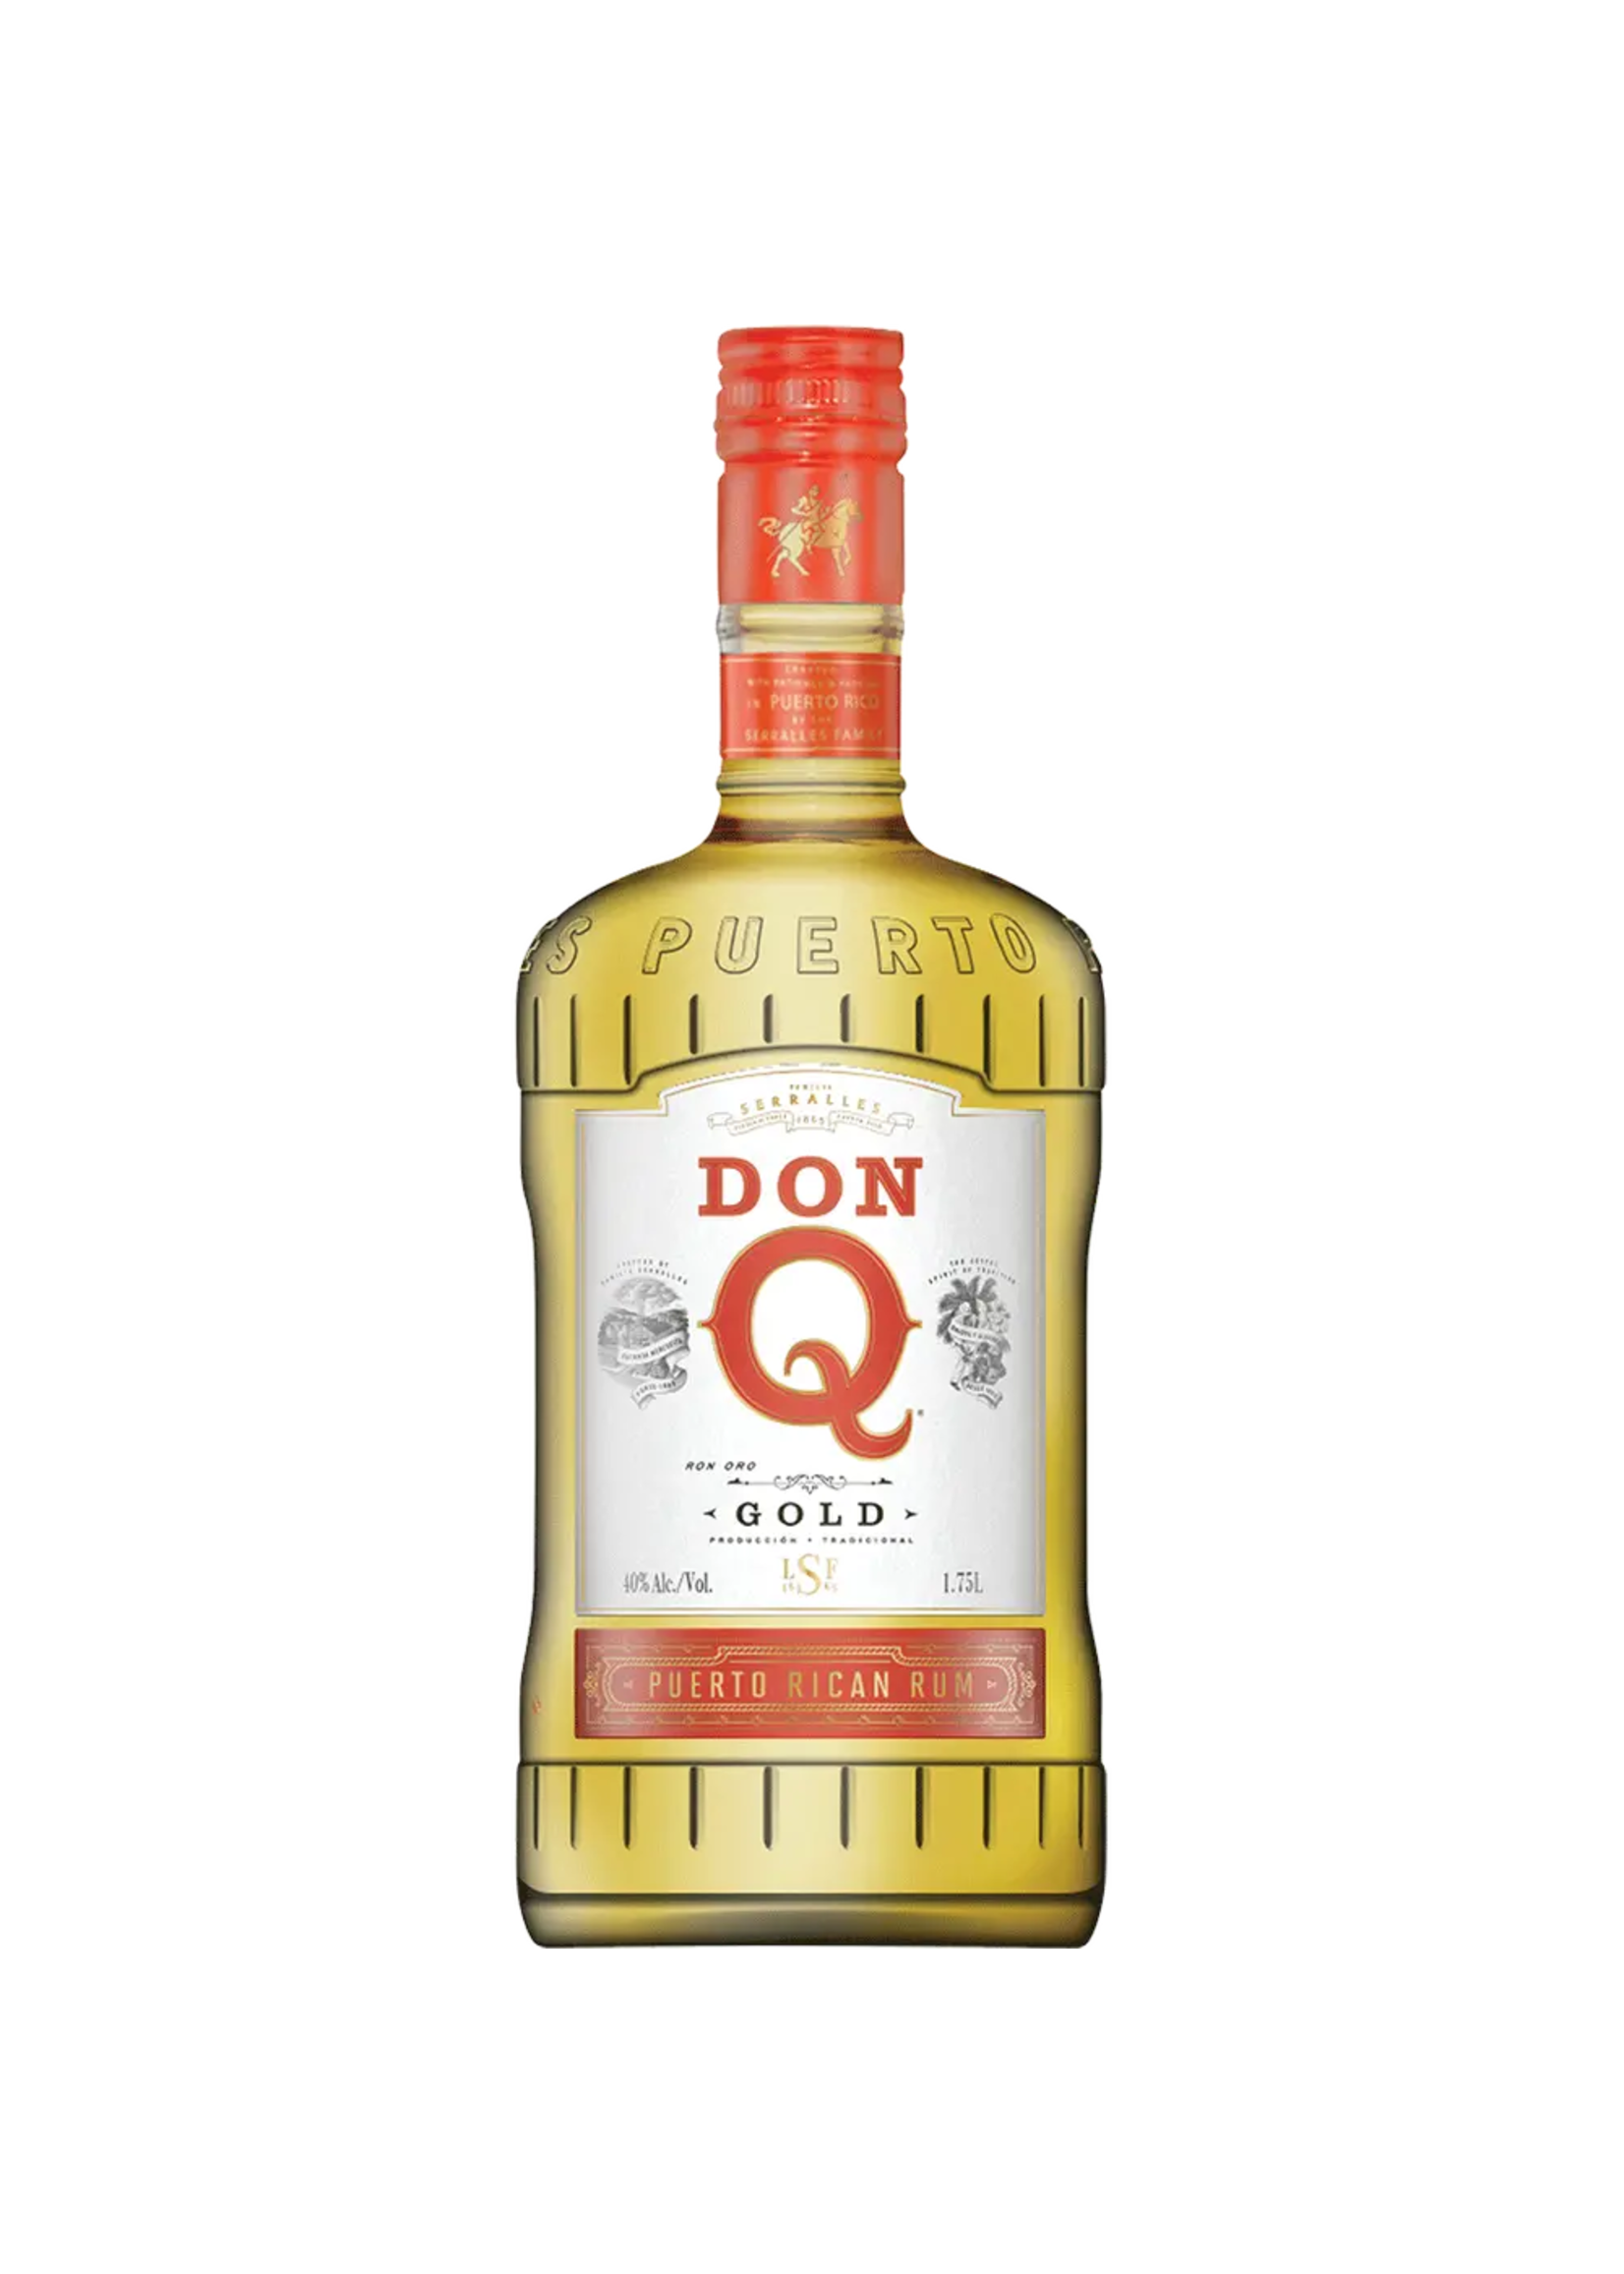 Don Q Gold Puerto Rican Rum 80Proof 1.75 Ltr